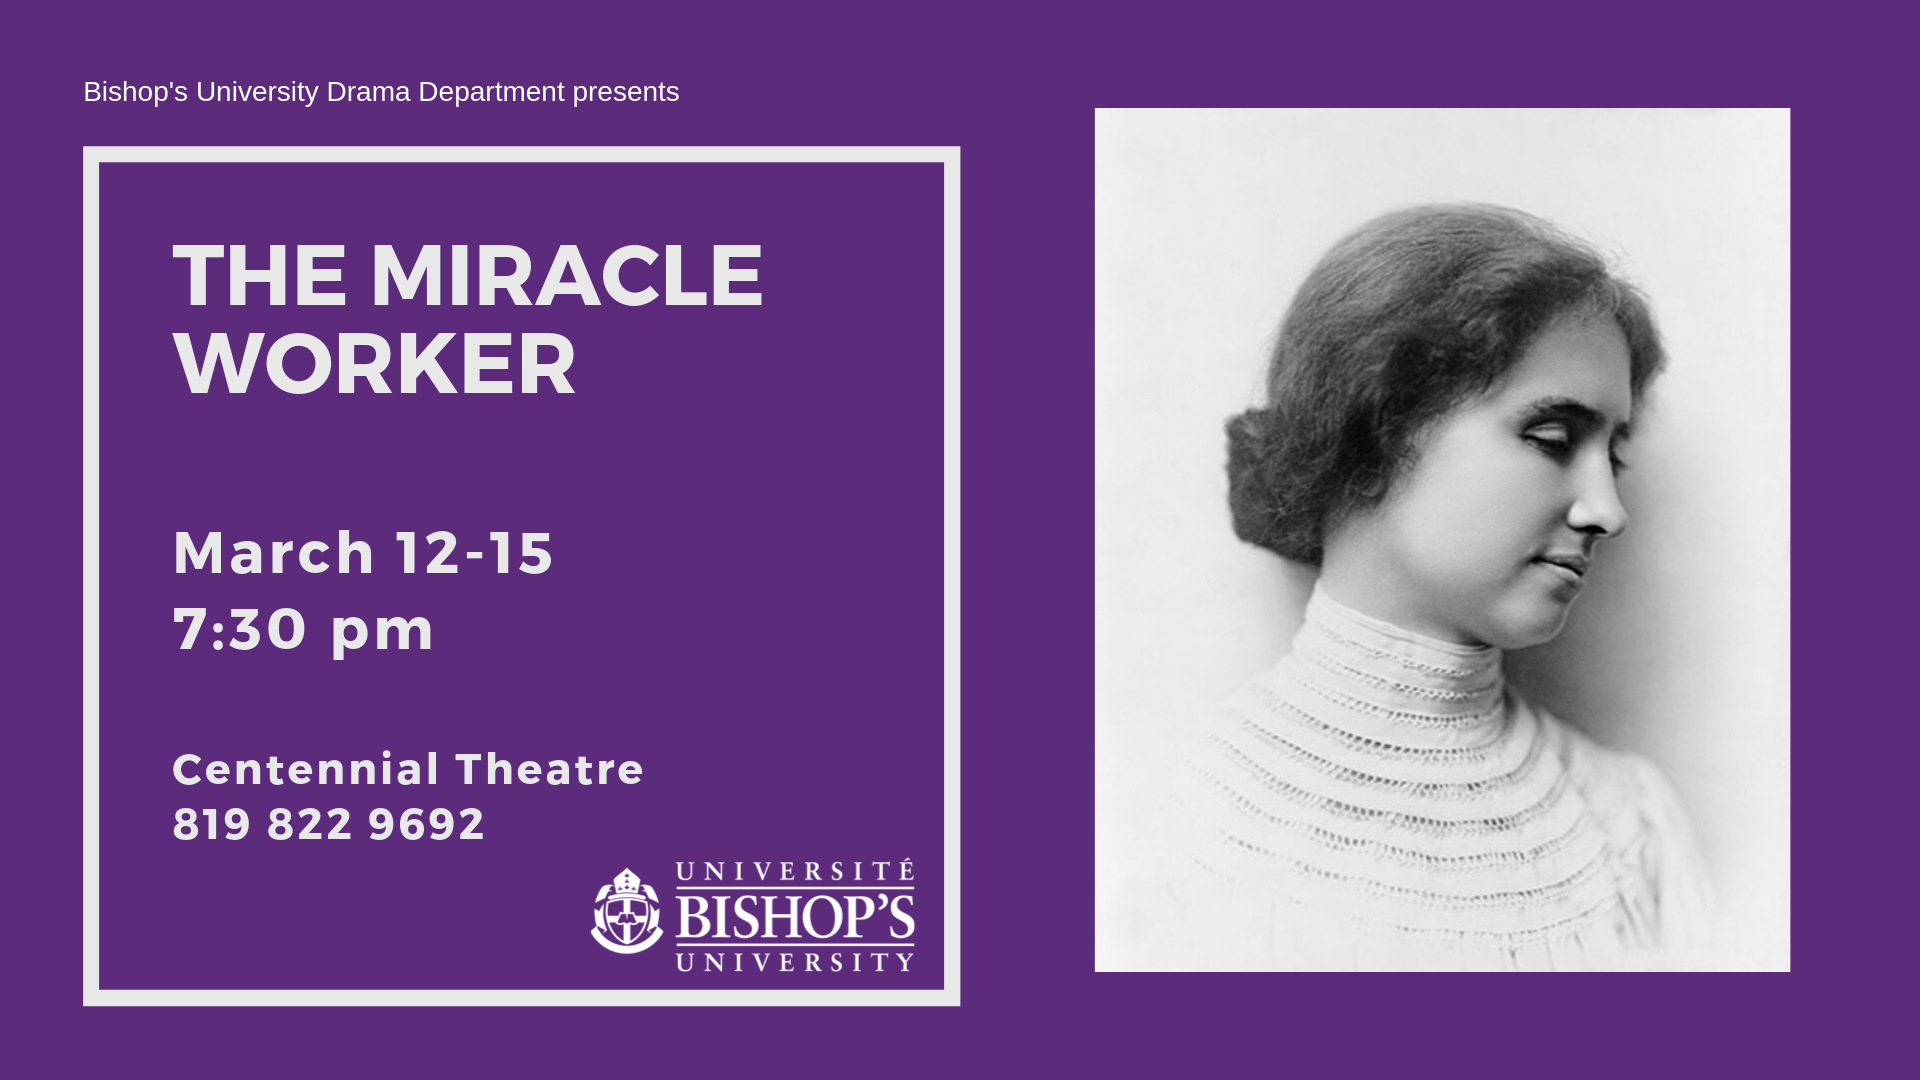 BU Drama presents “The Miracle Worker”